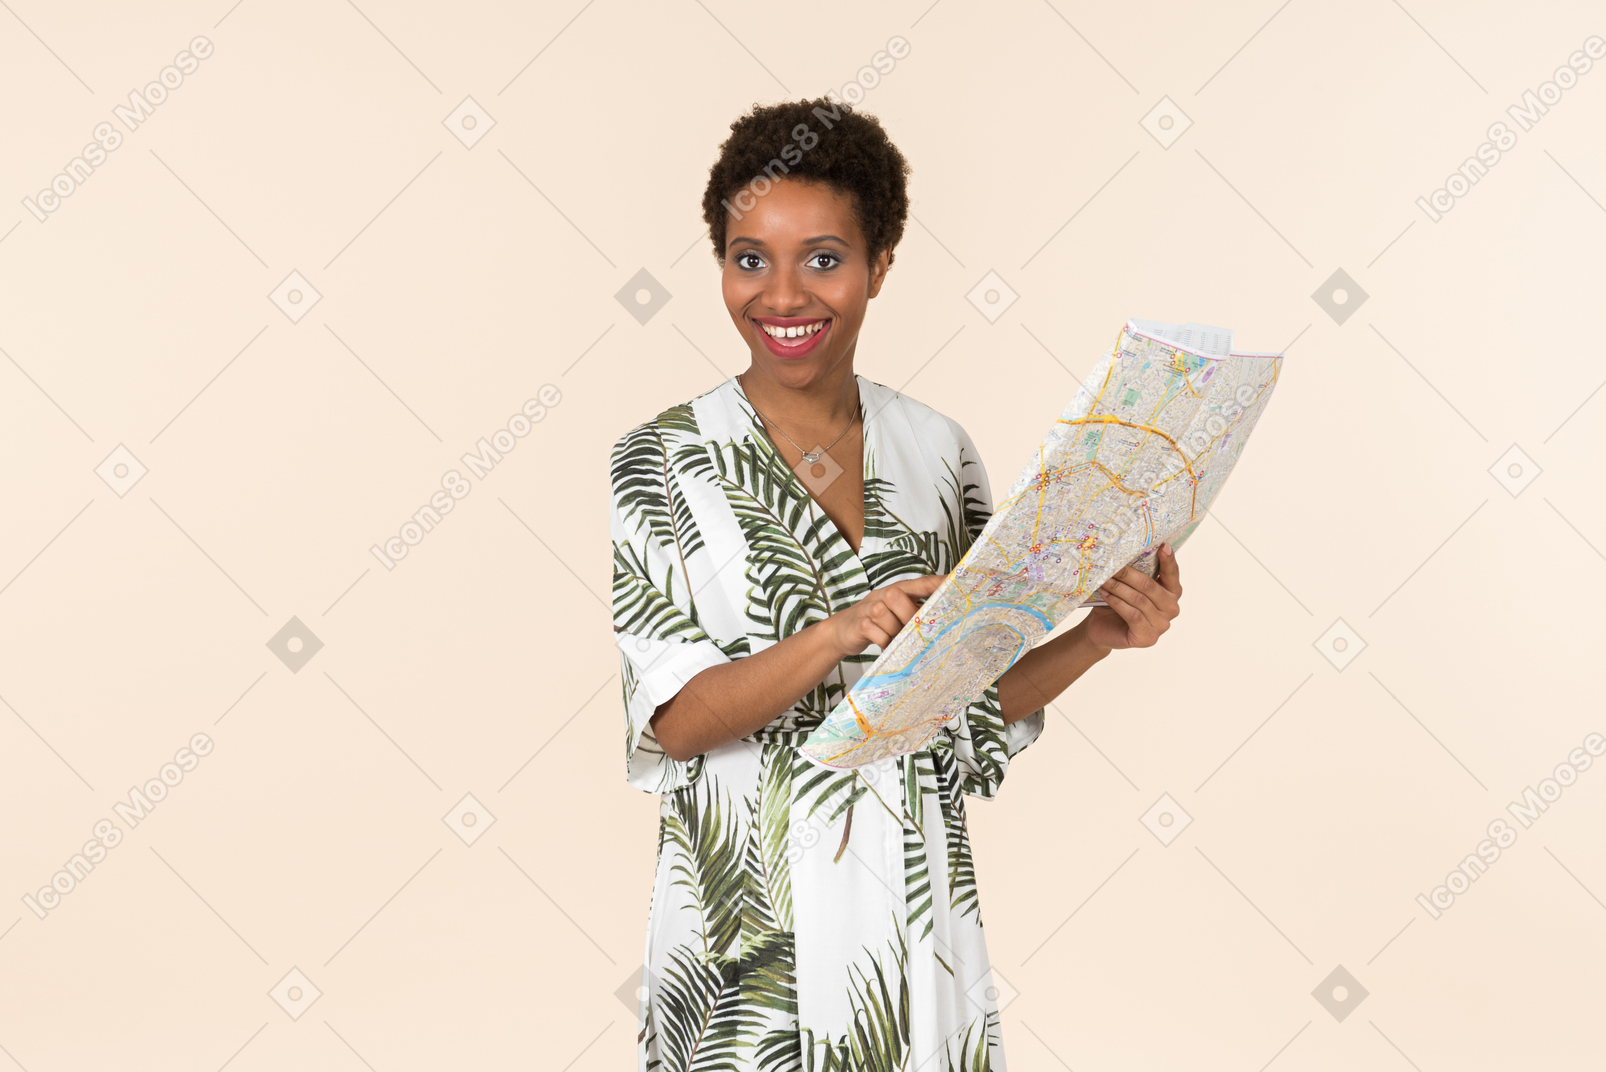 Black short-haired woman in a white and green dress, standing with a map in her hands